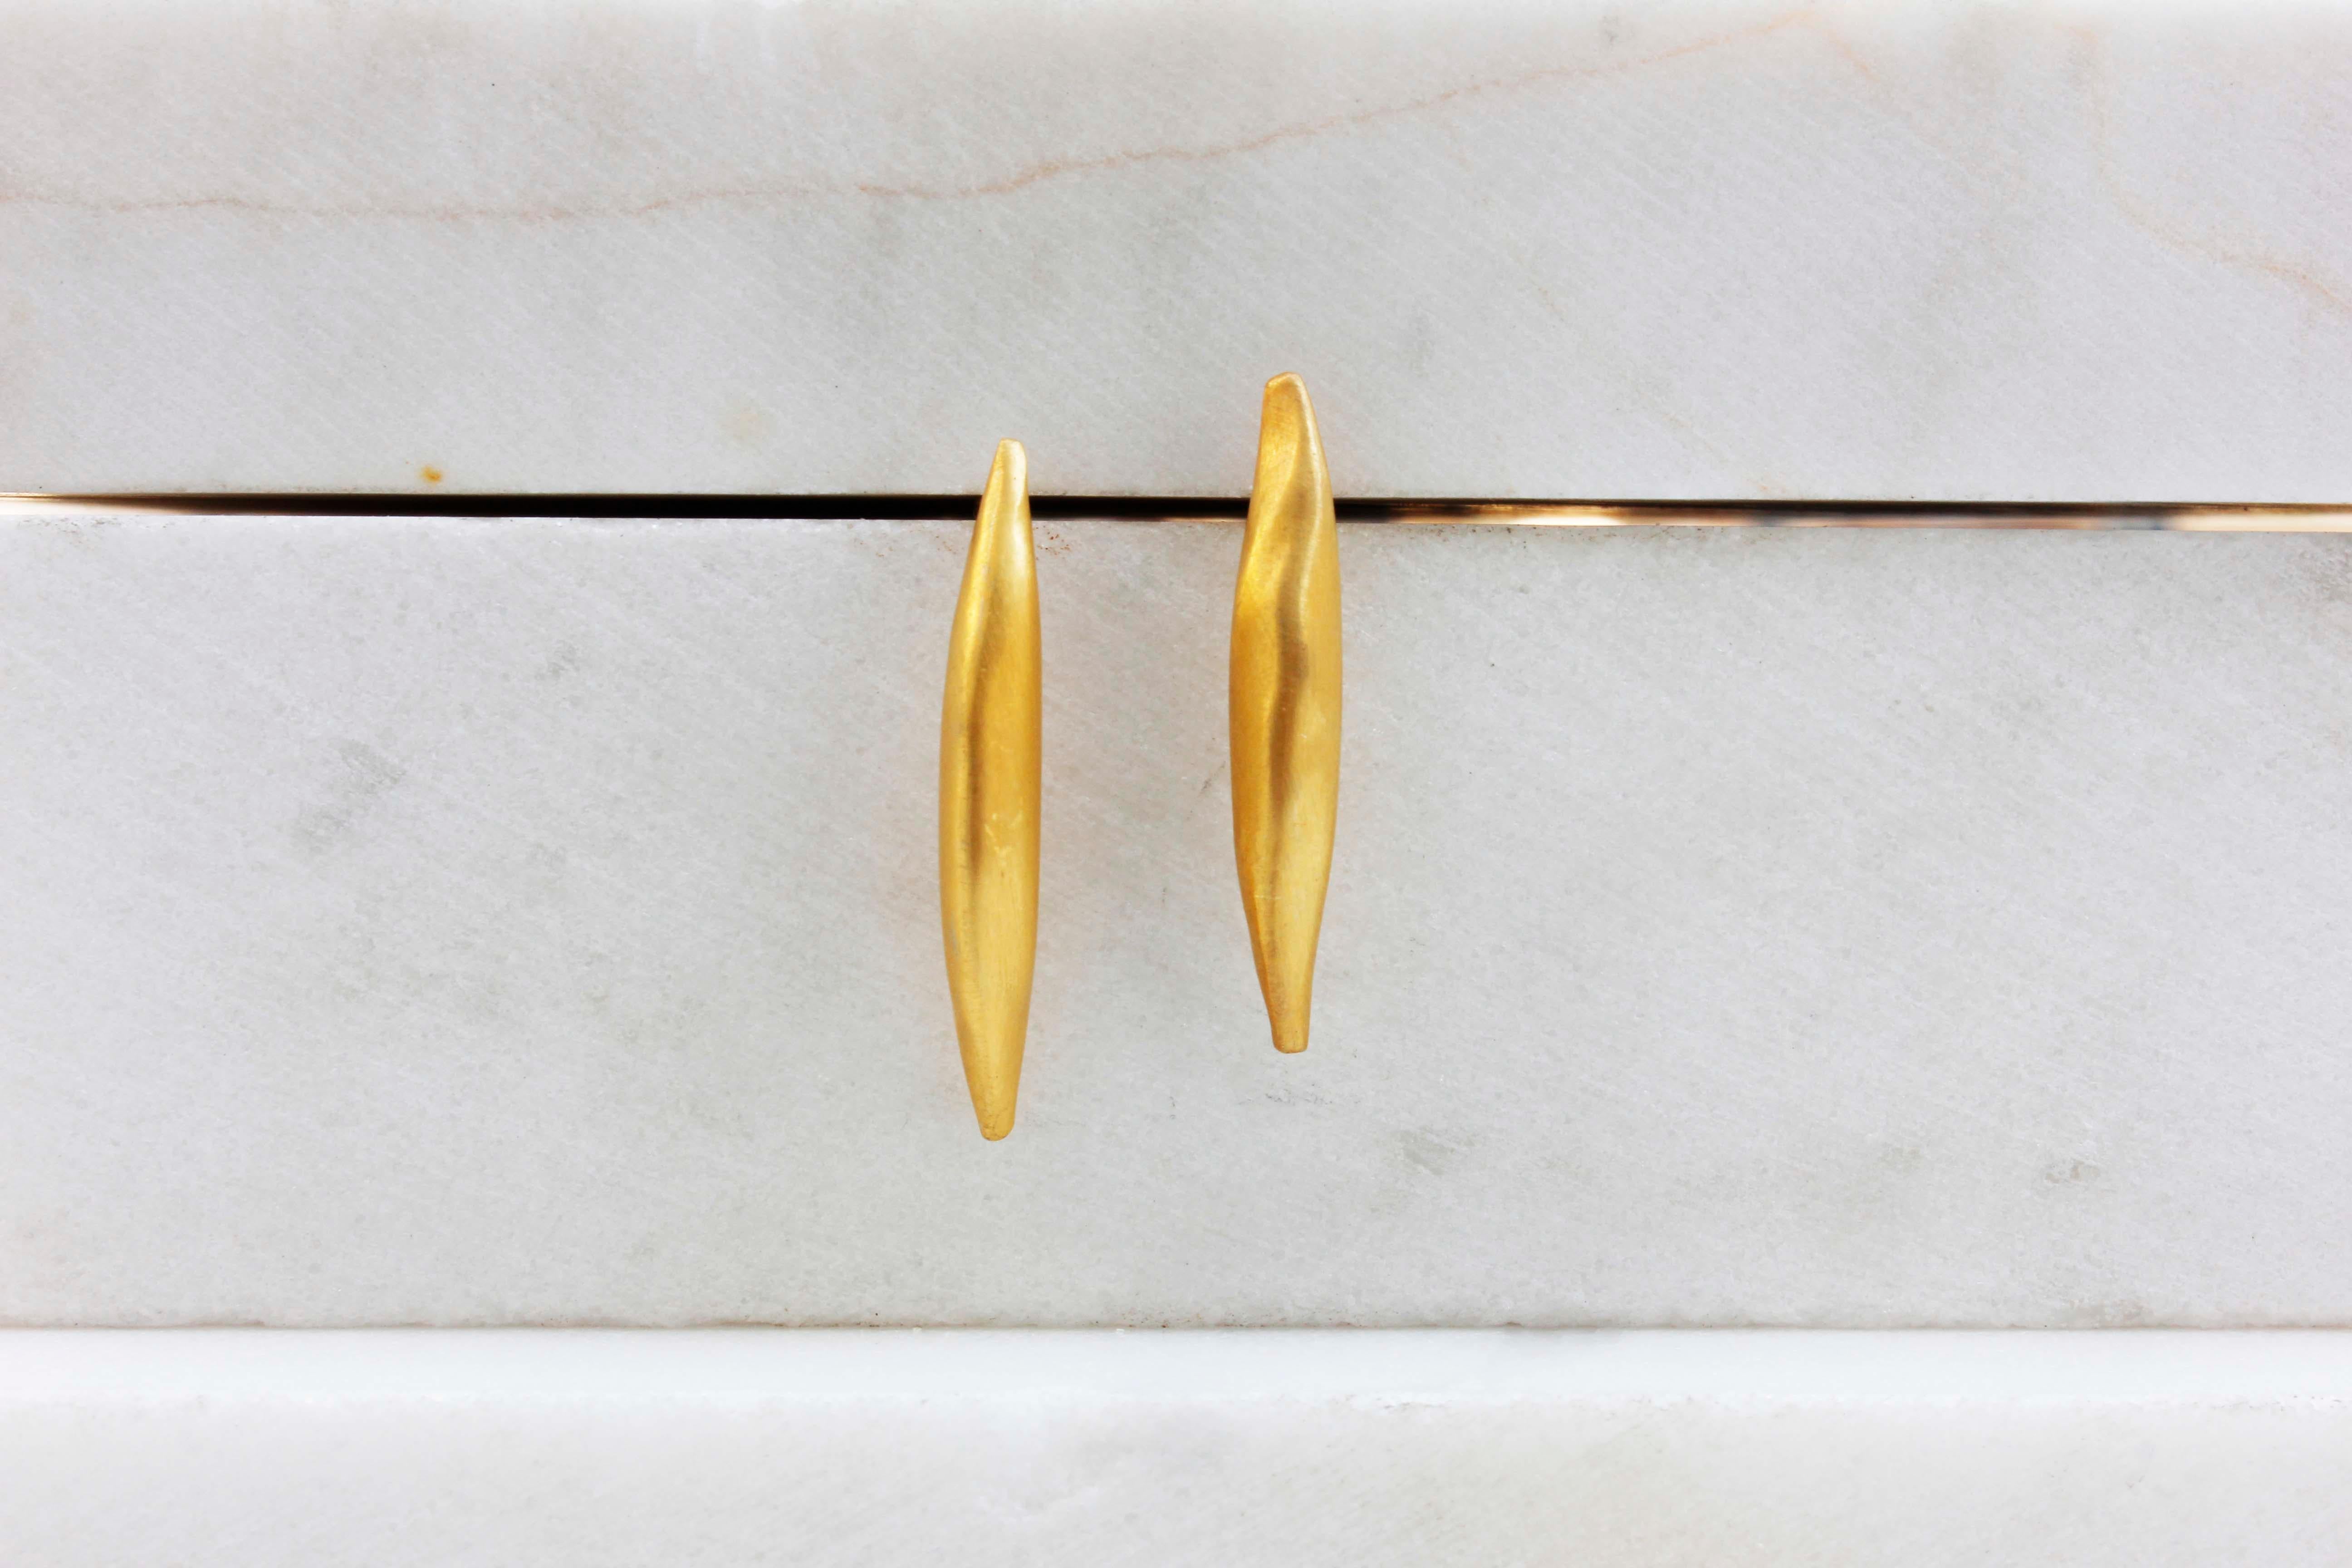 These elegant everyday “feather” earrings are empty inside and therefore elegant and lightweight.

Each piece is hammered by hand from a flat sheet into a hollow form, with the edges coming together perfectly above the curve.

Width: 0.4cm
Length: